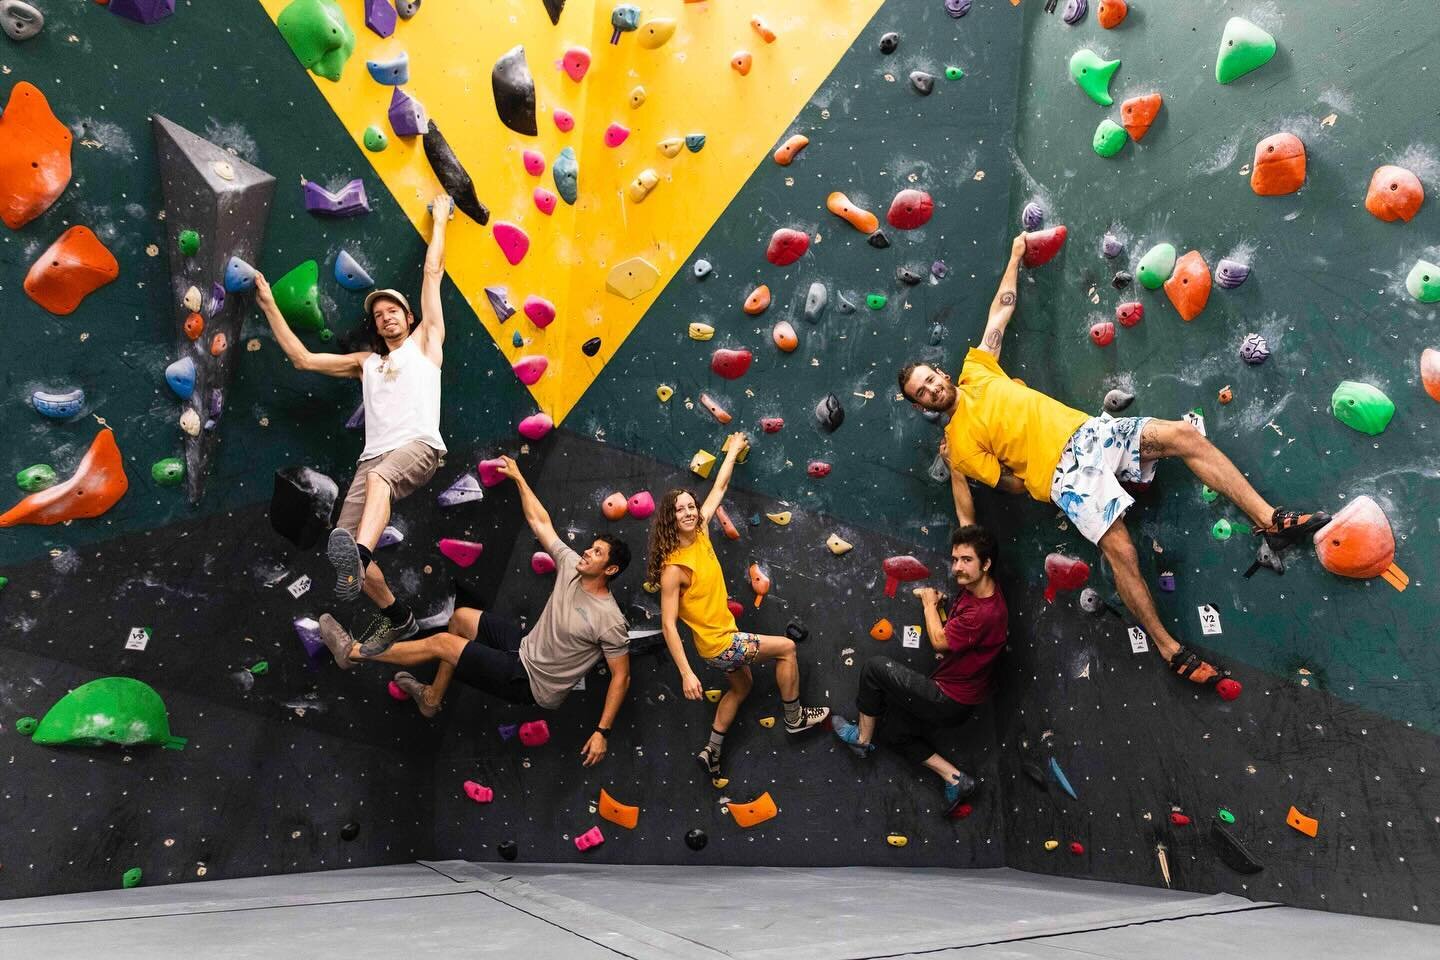 ✨Happy Holidays from Gold Crush!✨

As you may know, Gold Crush has been on a wild ride over the past 18 months with the closing of the original gym and the rebuilding of a new and expanded indoor climbing and fitness facility.

We are so happy to be 